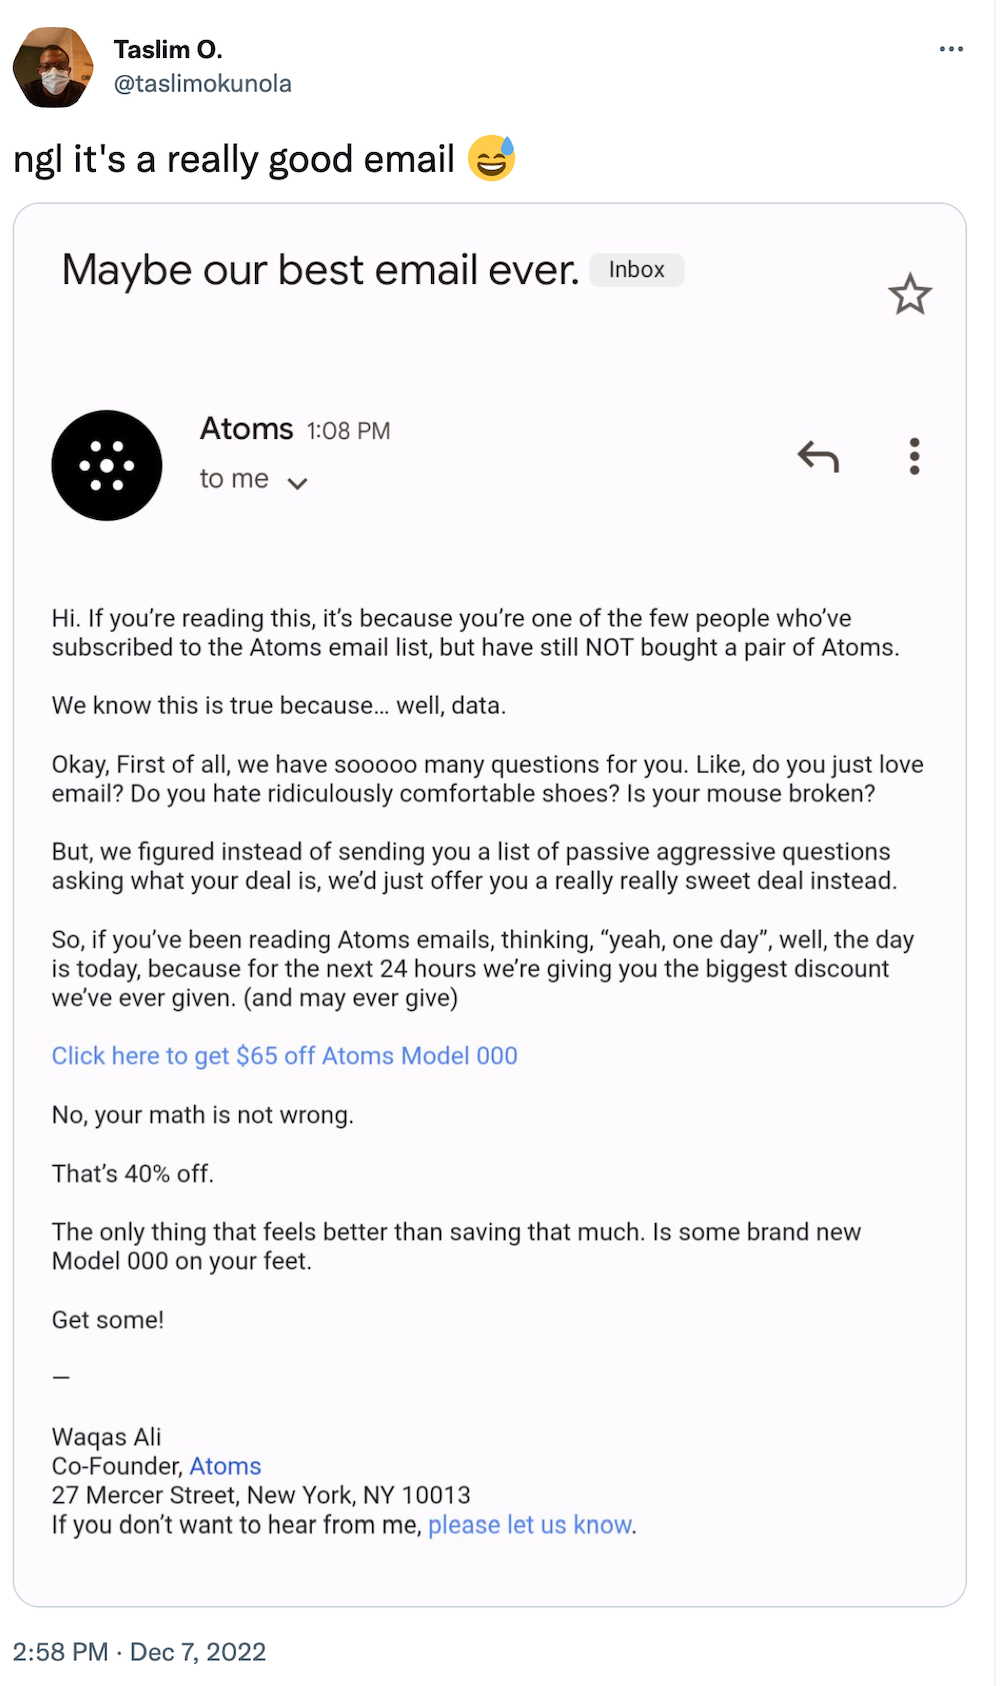 Tweet from @taslimokunola:
ngl it's a really good email

Email shows note from Atoms founder offering $65 off a pair of Atoms Model 000, segmented towards customers who have not bought yet.